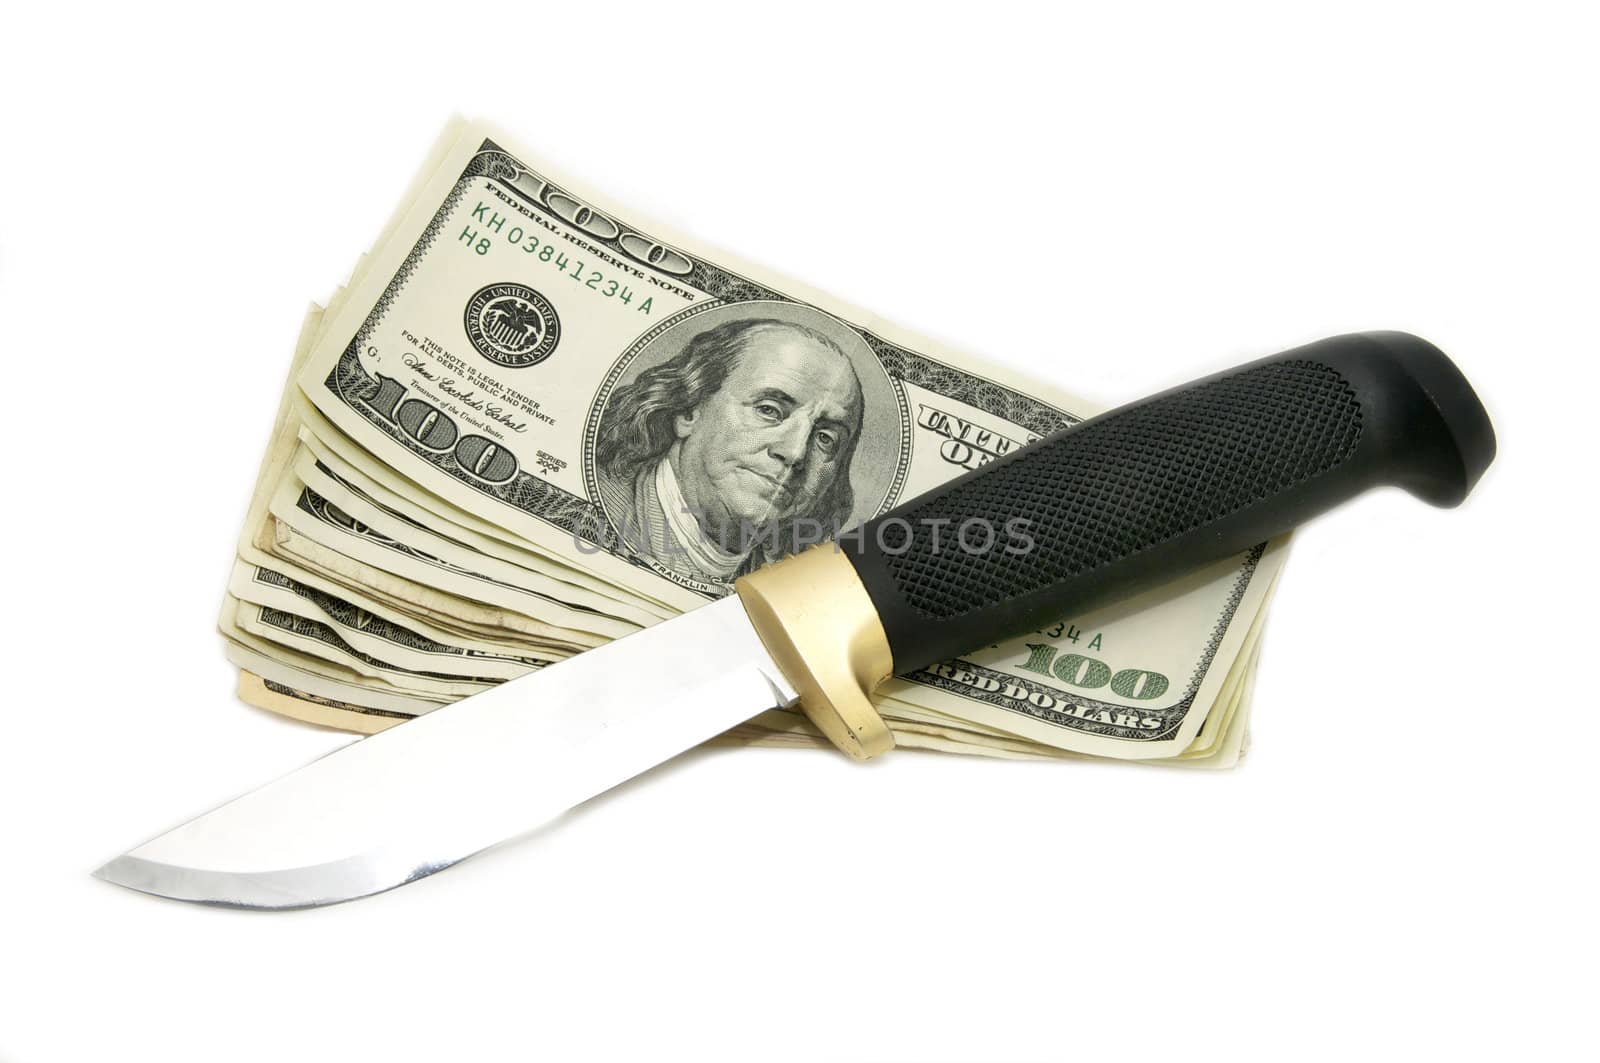 dollars and a knife on a white background